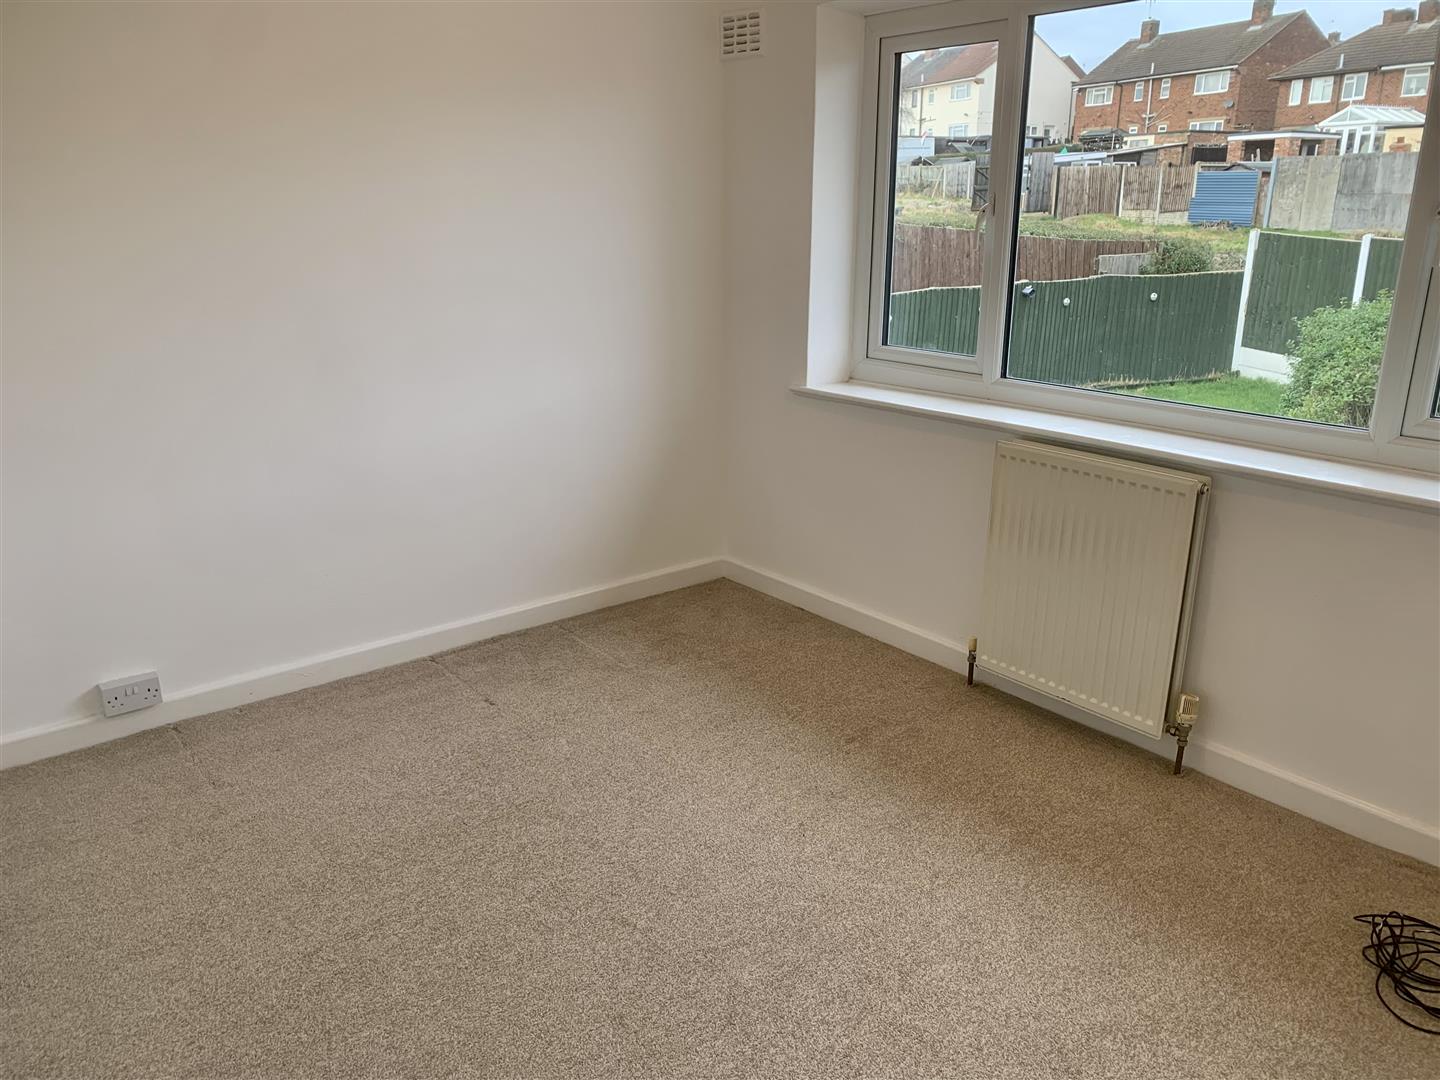 3 bed  to rent in Kirk Hallam  - Property Image 12